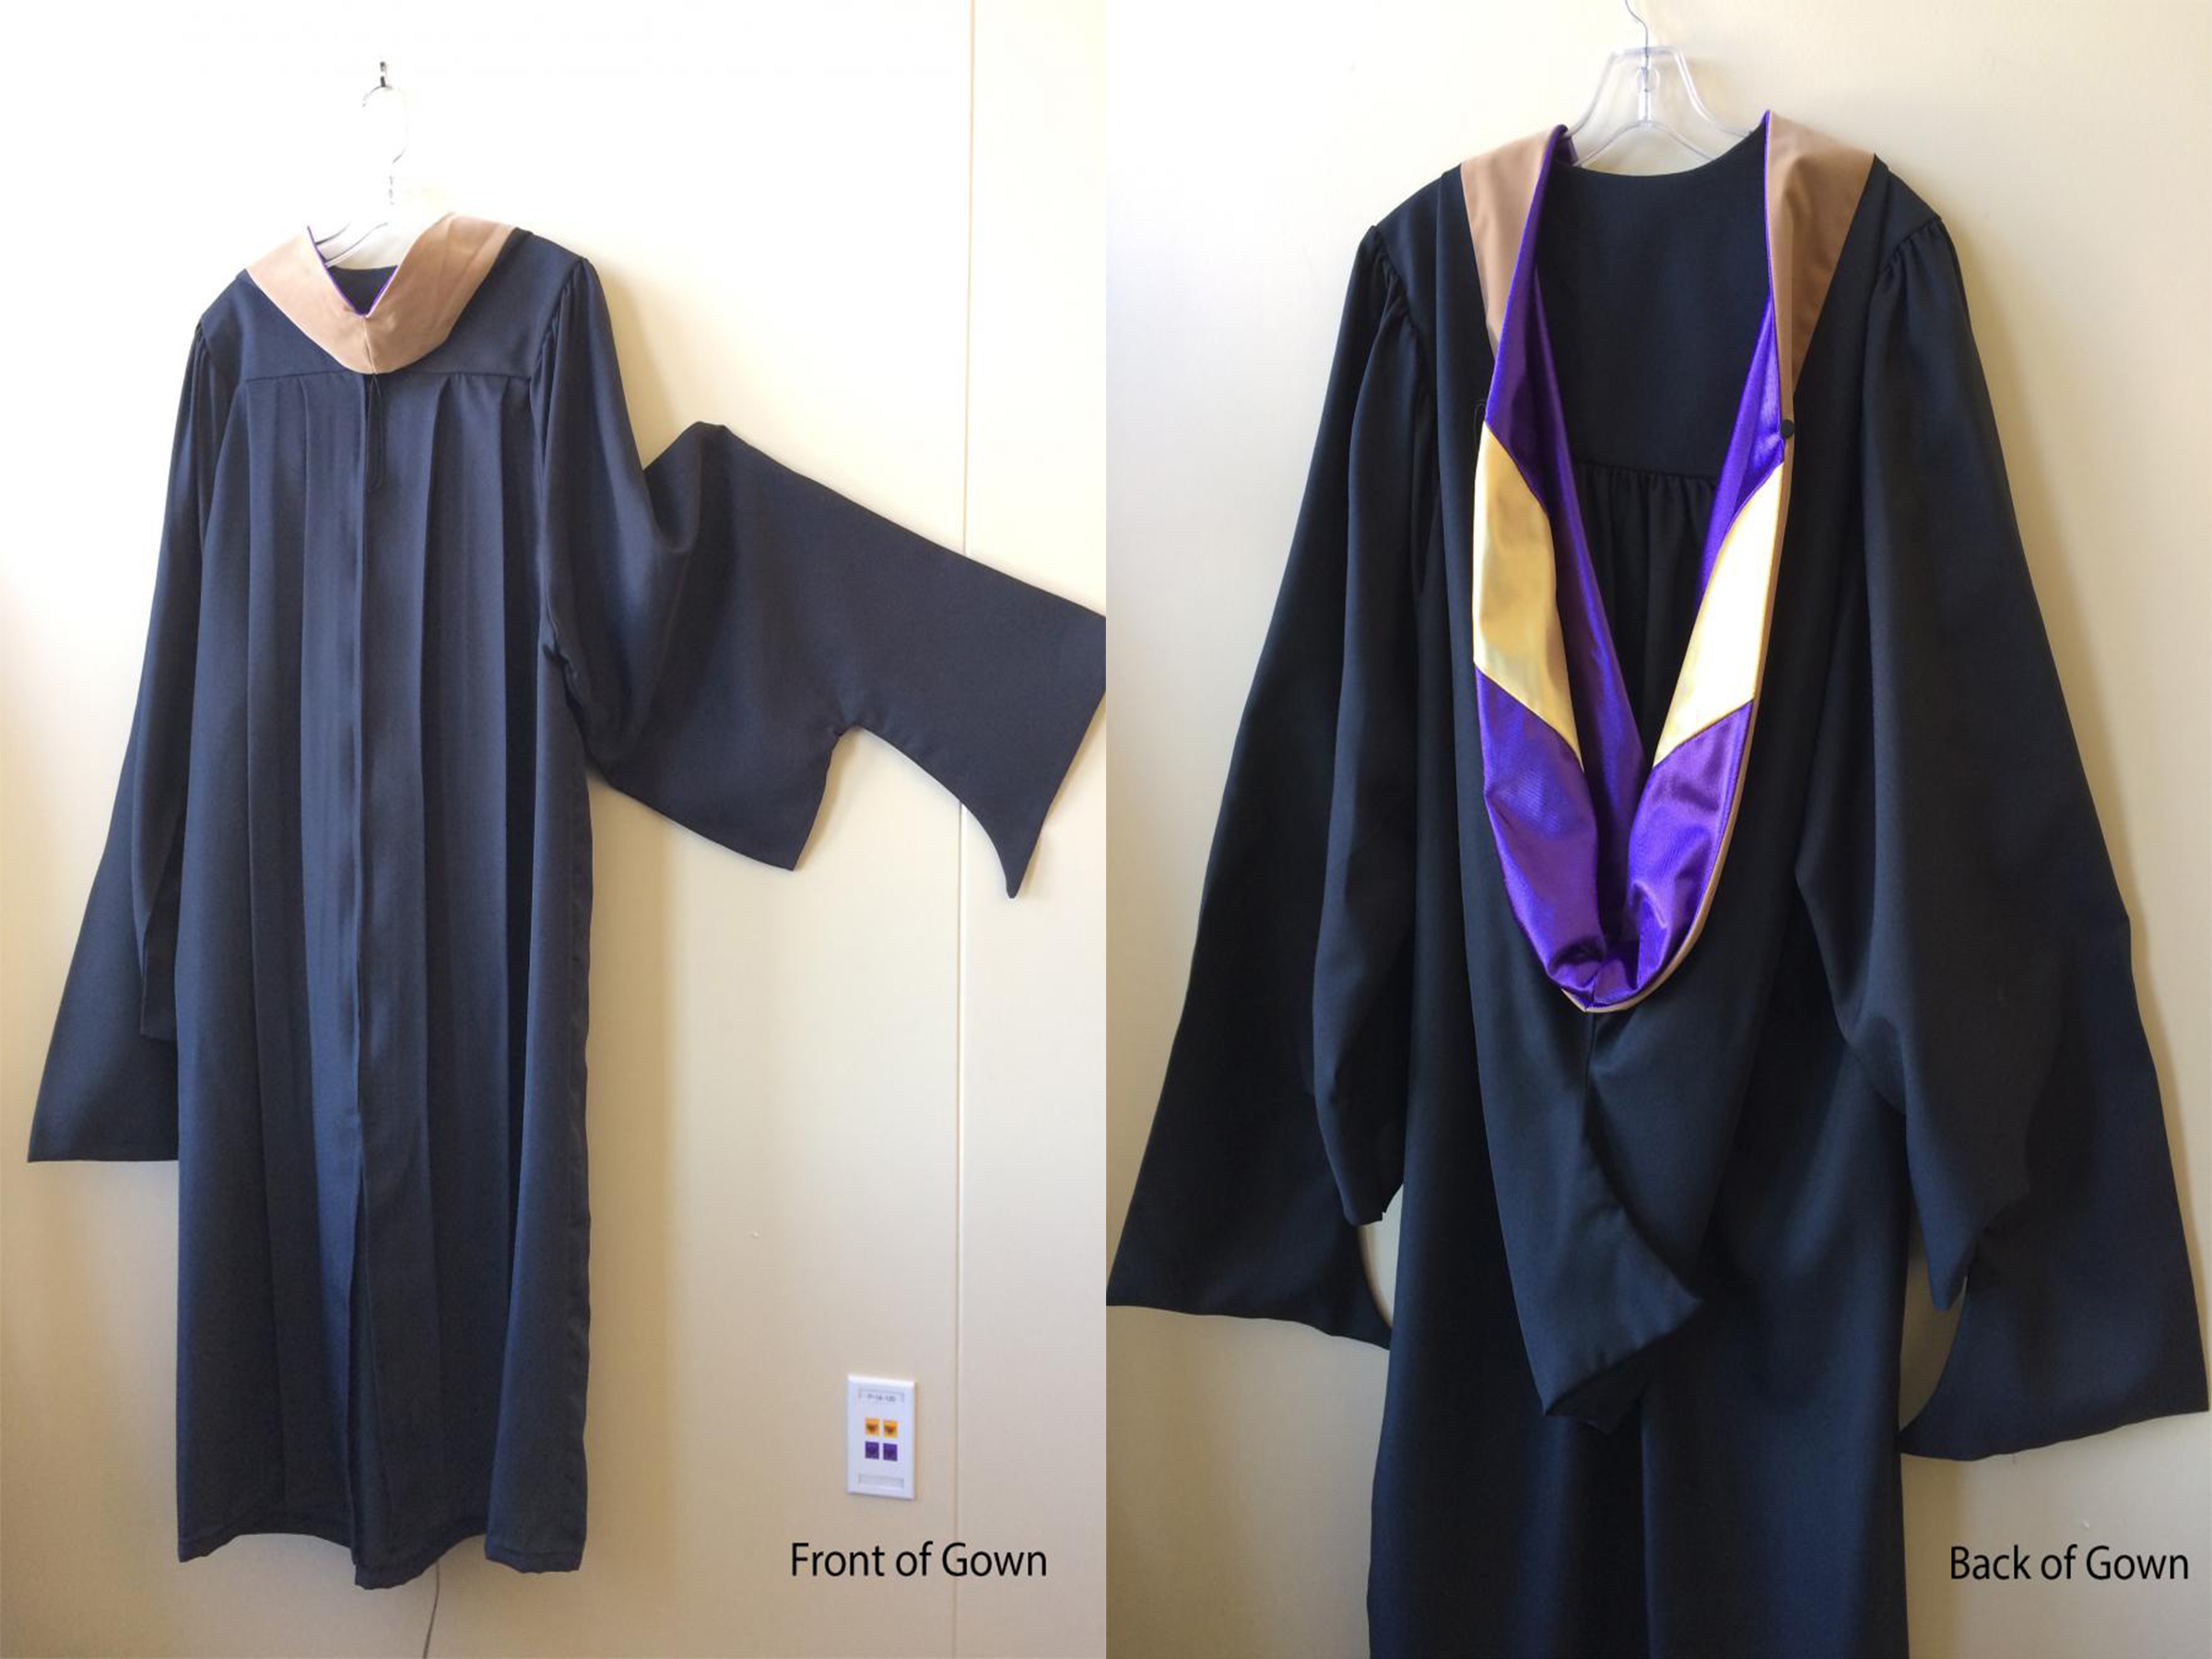 The front and back of the graduate regalia clothing 